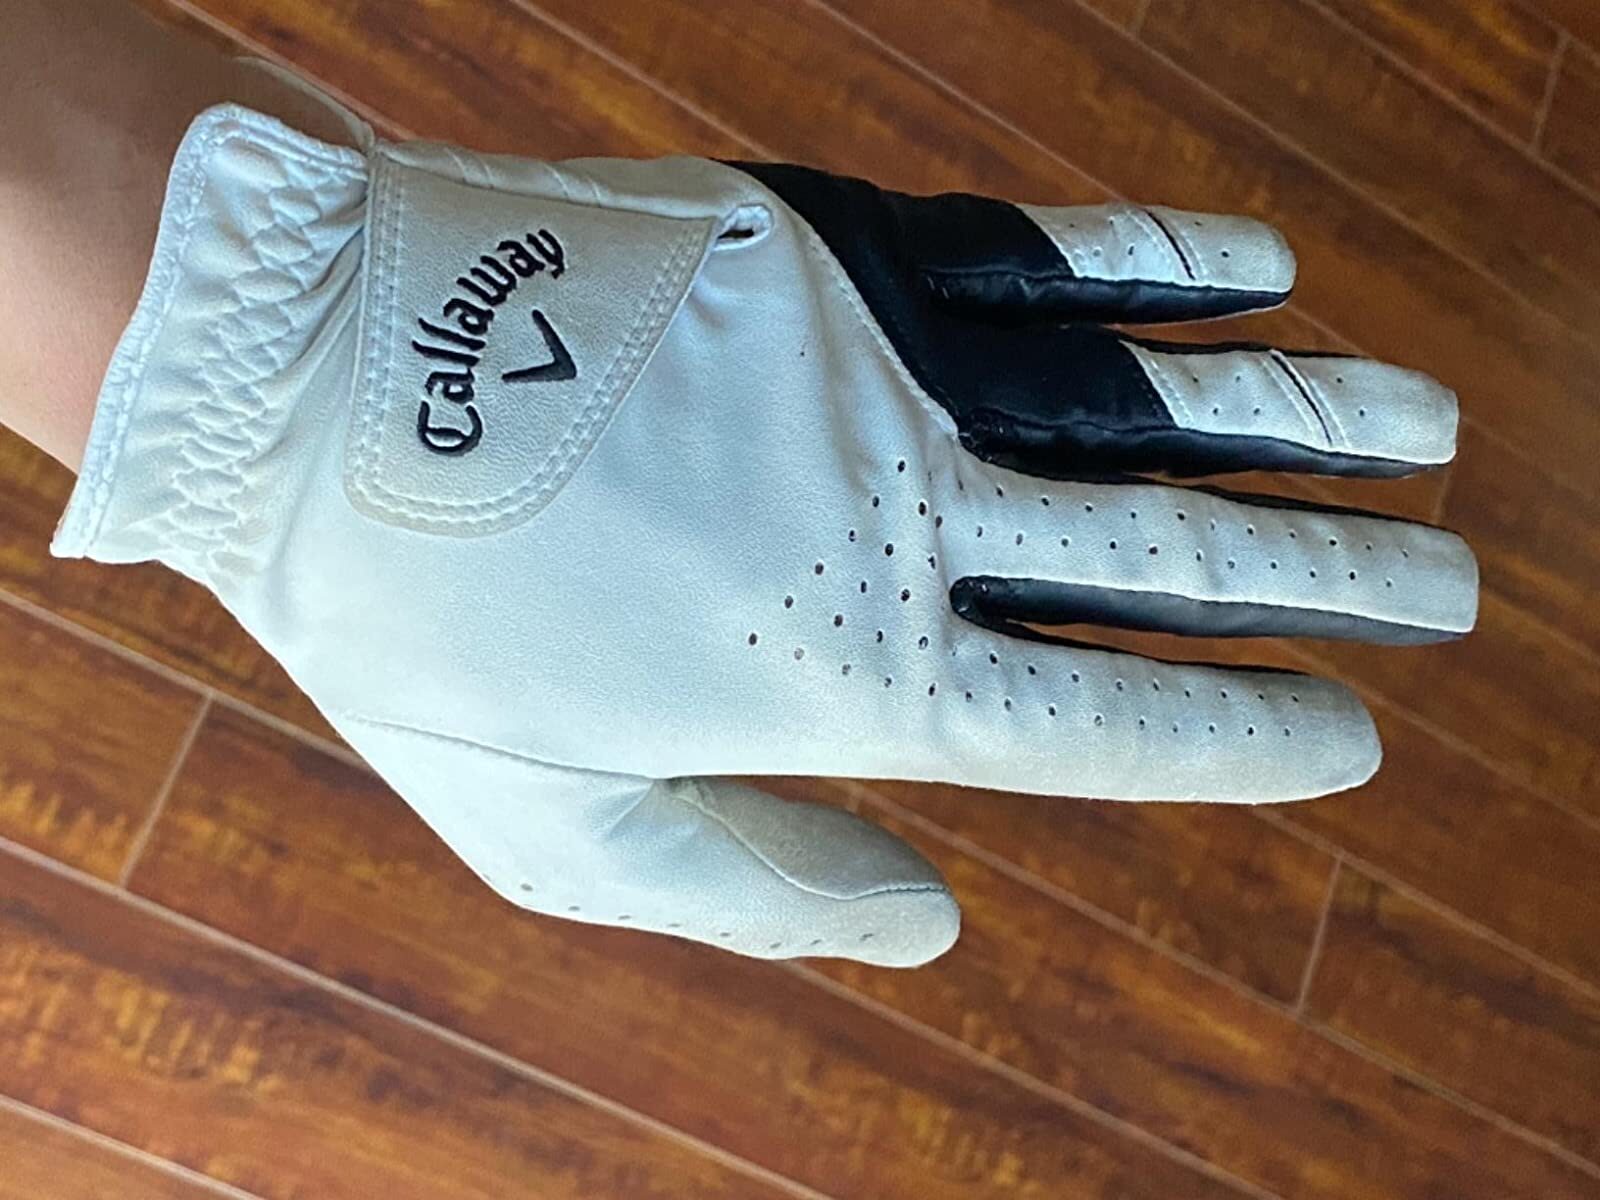 Why Not To Wear Golf Gloves On Both Hands?